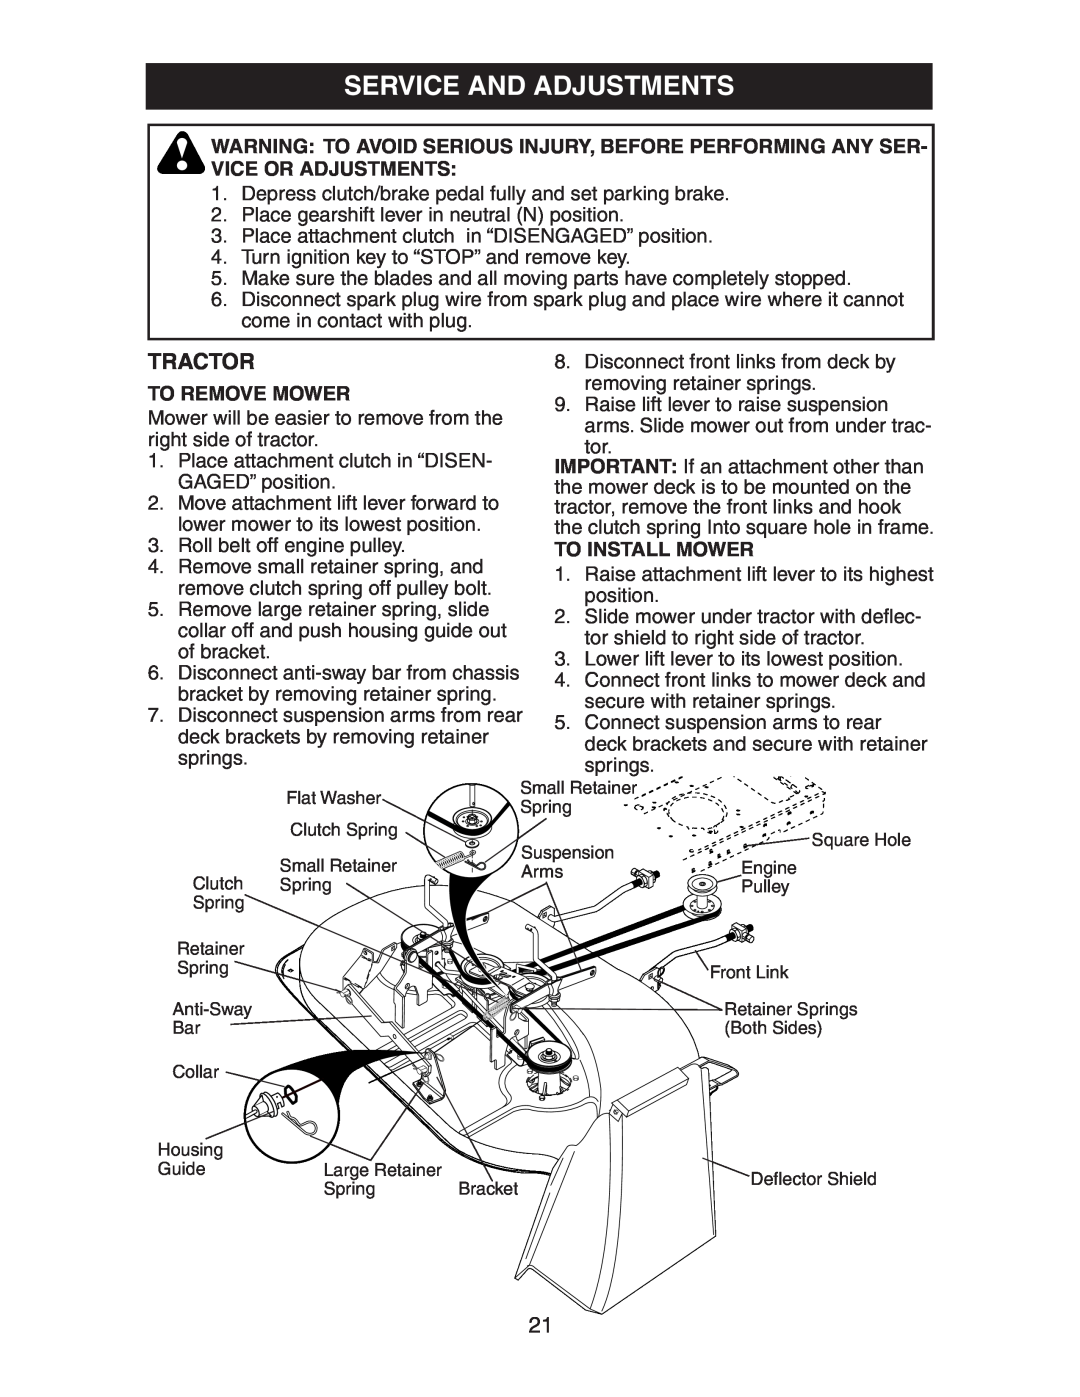 Electrolux AG15538A manual Service And Adjustments, To Remove Mower, To Install Mower, Tractor 